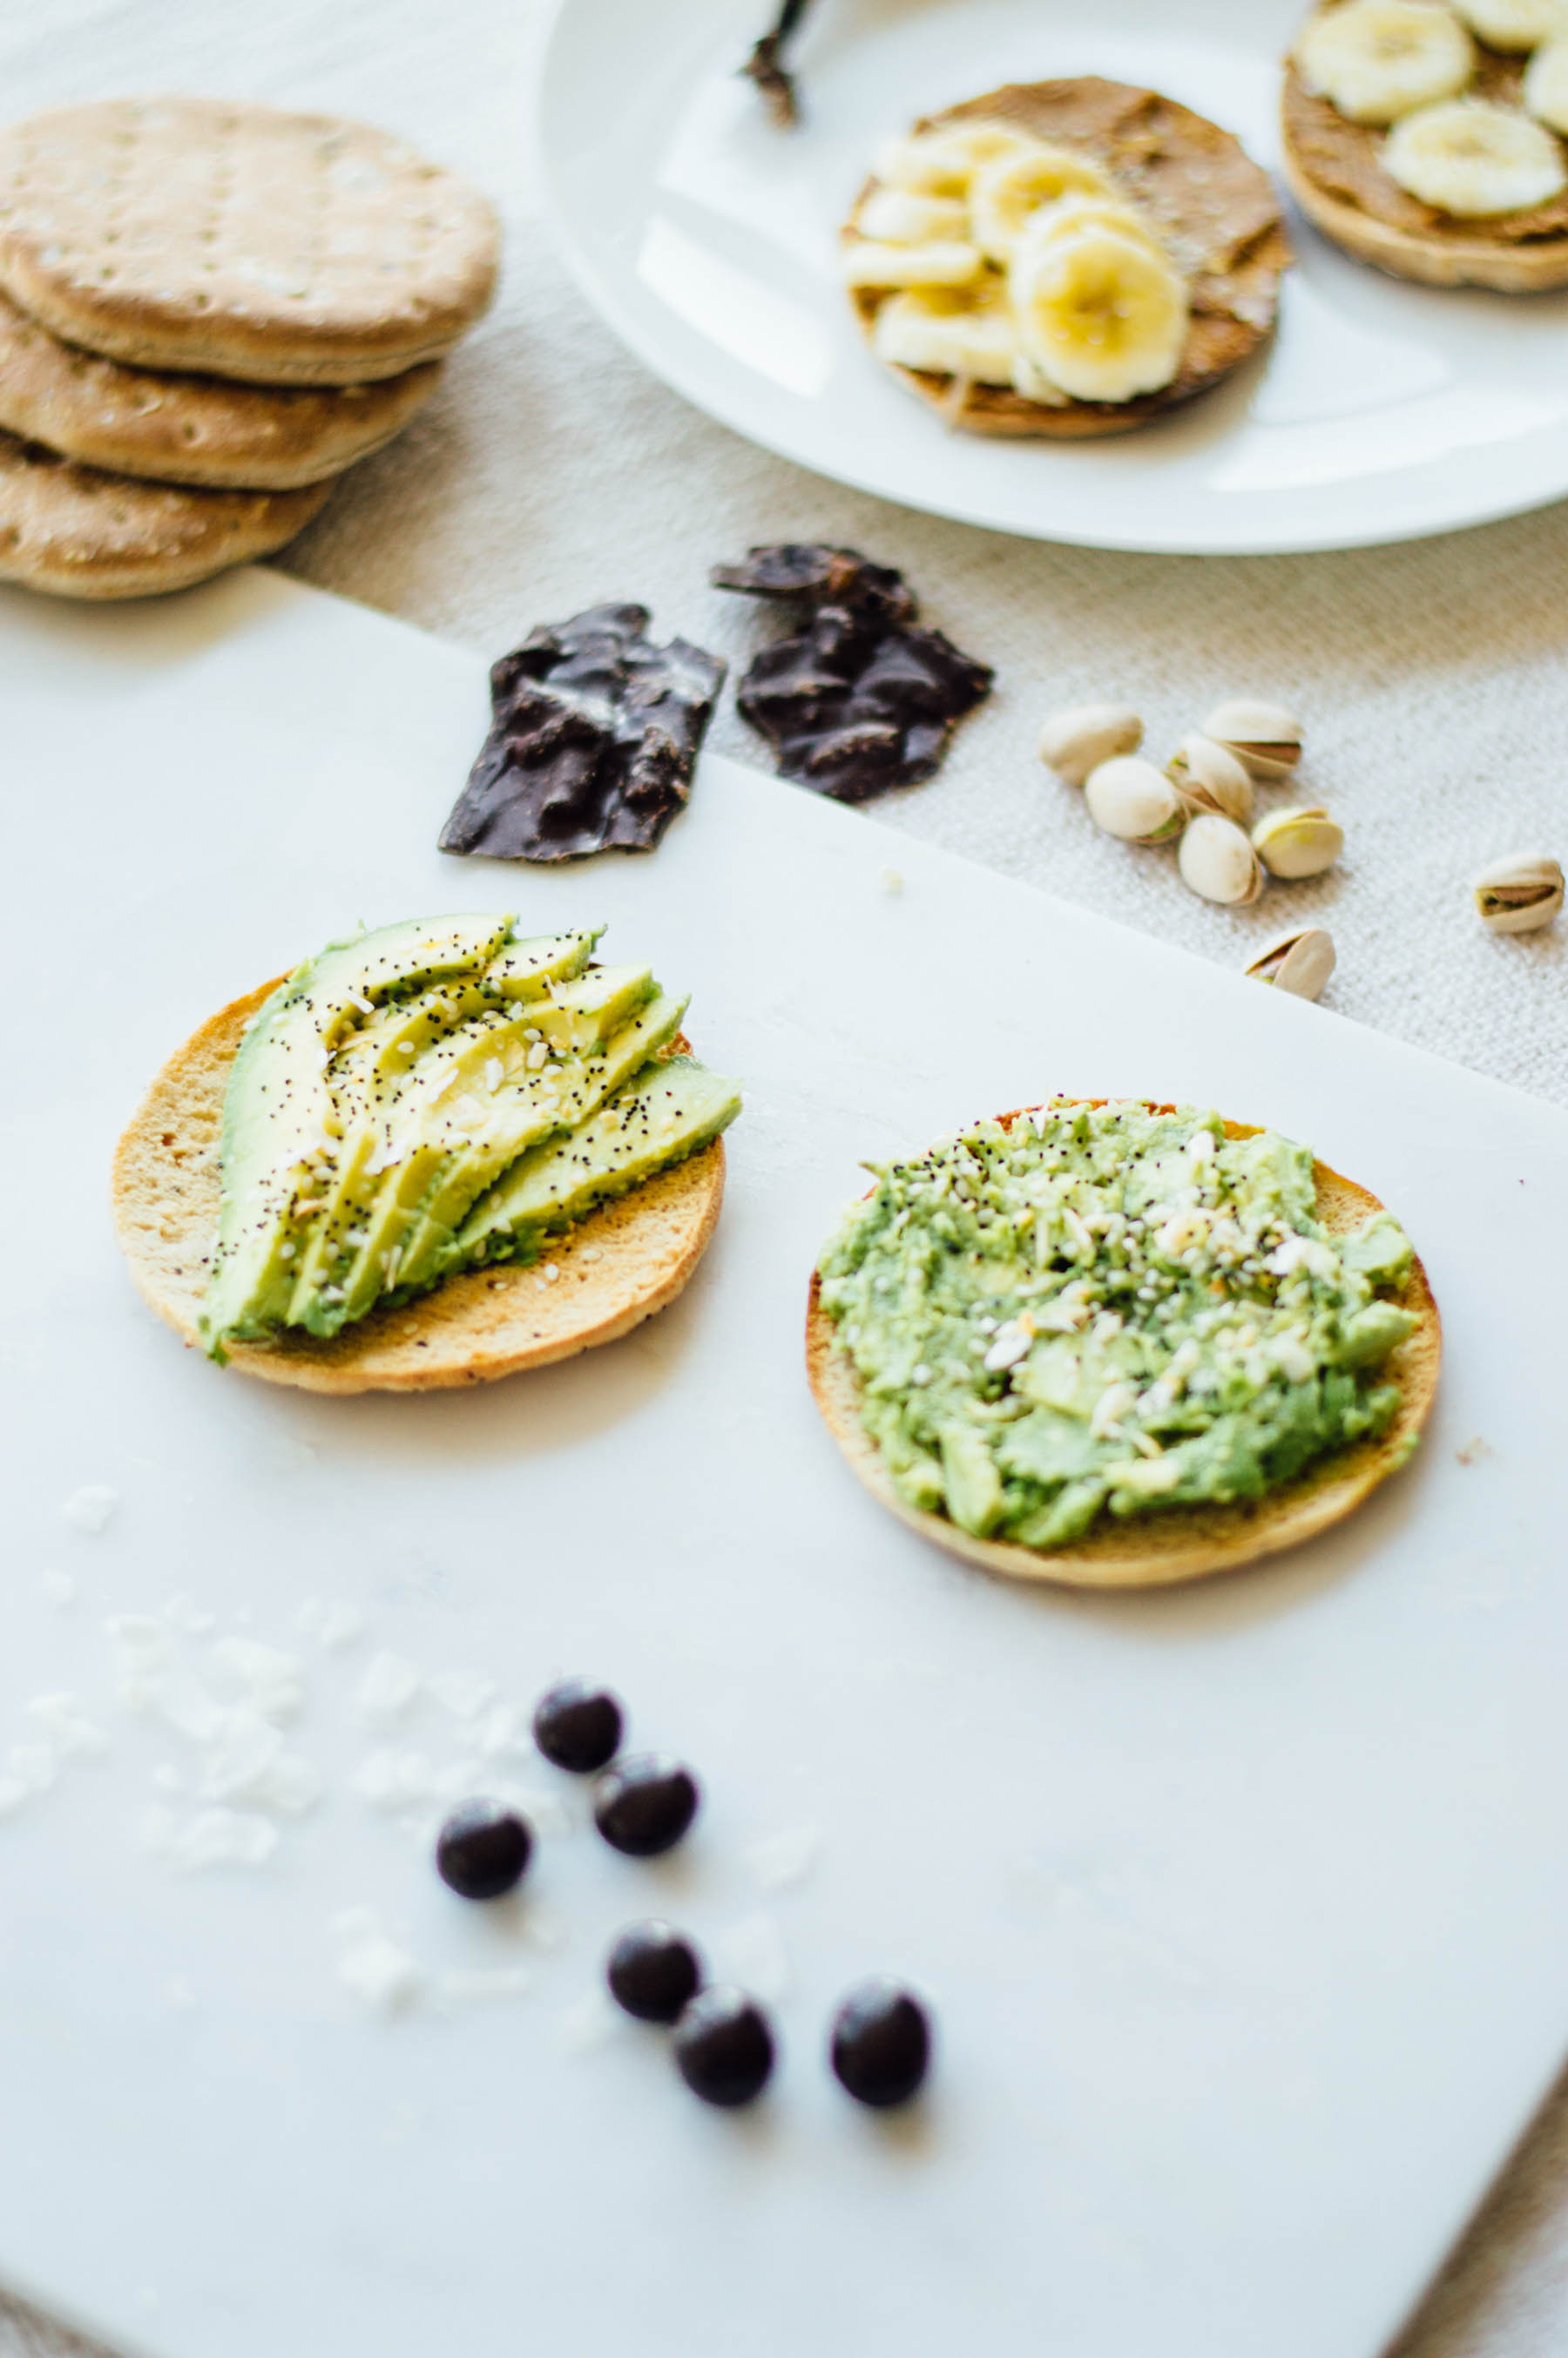 Healthy snack tips for the 2017 gal on the go - think avocado everything on a sandwich thin. So much yum! | bygabriella.co